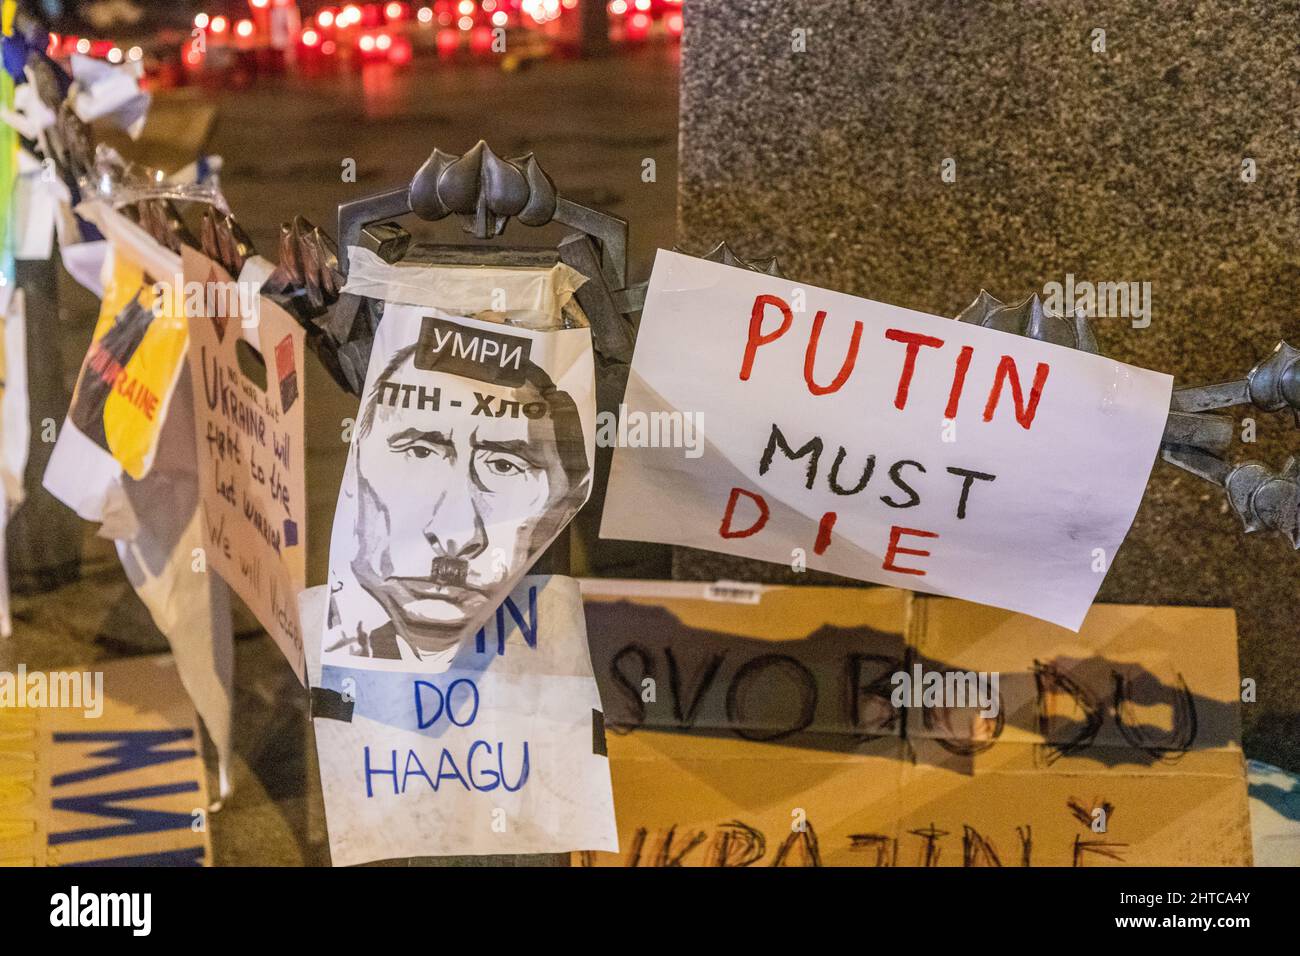 PRAGUE, CZECH REPUBLIC - FEBRUARY 27, 2022: Candles lit on the Wenceslas Square in Prague as a protest against Russian invasion of Ukraine , Czech Rep Stock Photo